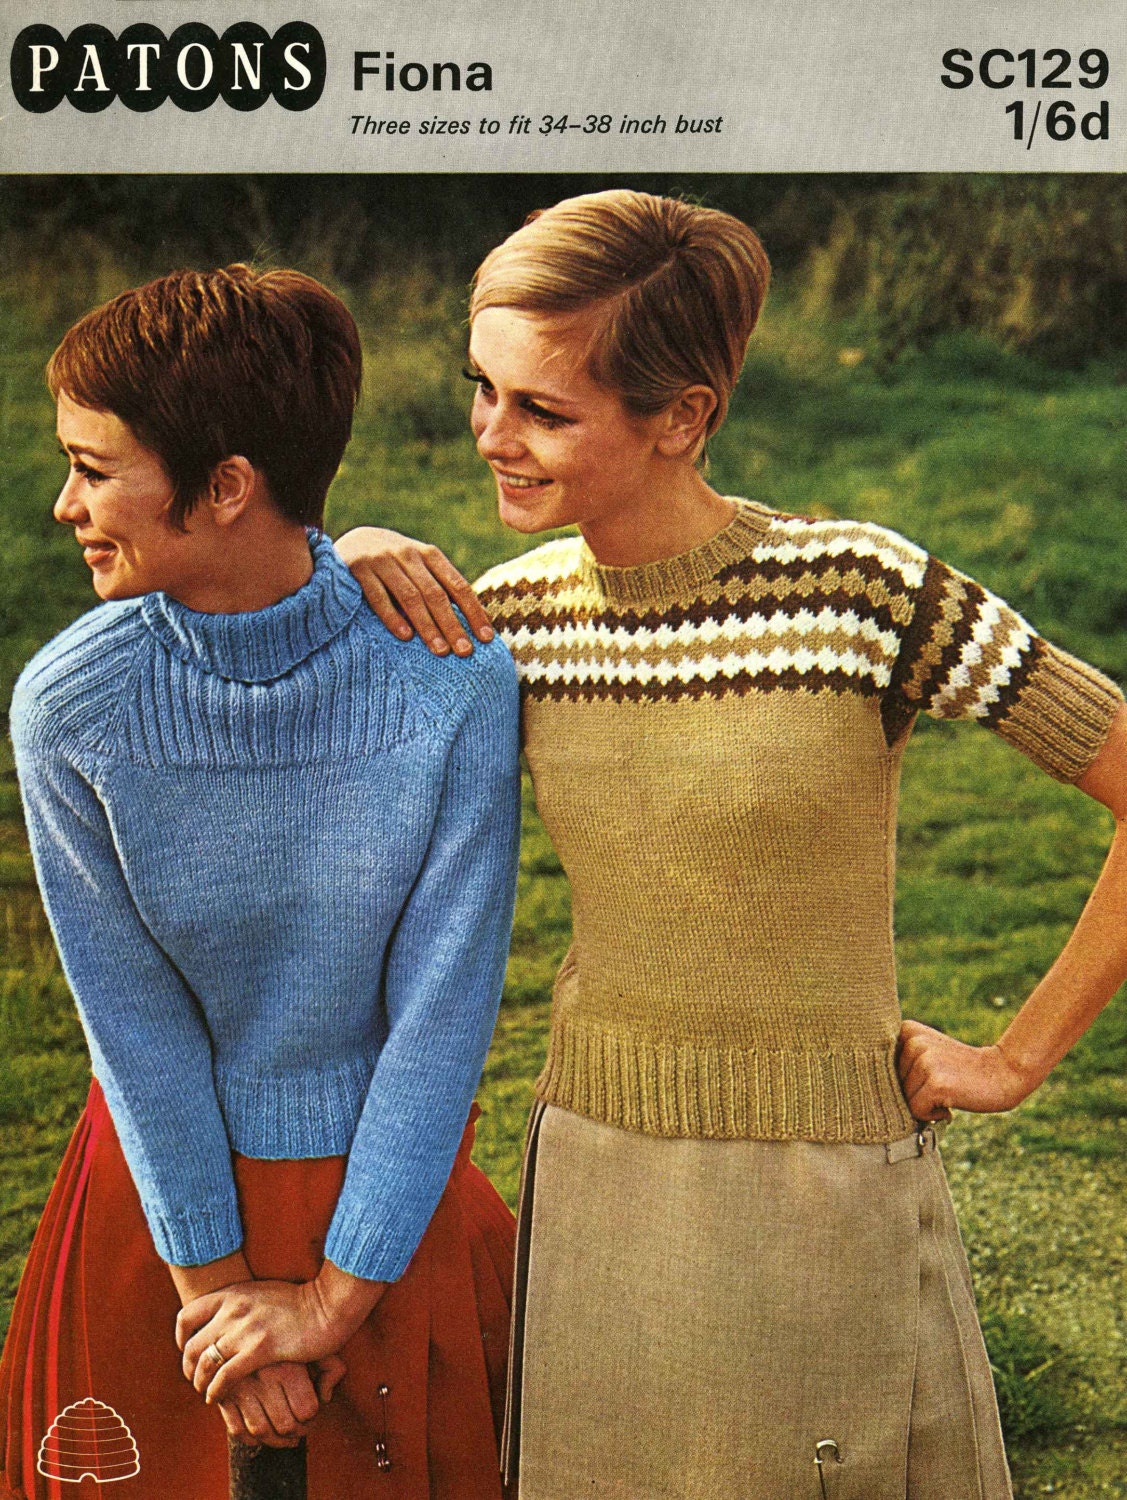 Ladies Sweater / Jumper, Shetland look, Polo, Round, Ribbed, Fair Isle, 34"-38" Bust, DK, 60s Knitting Pattern, Patons 129